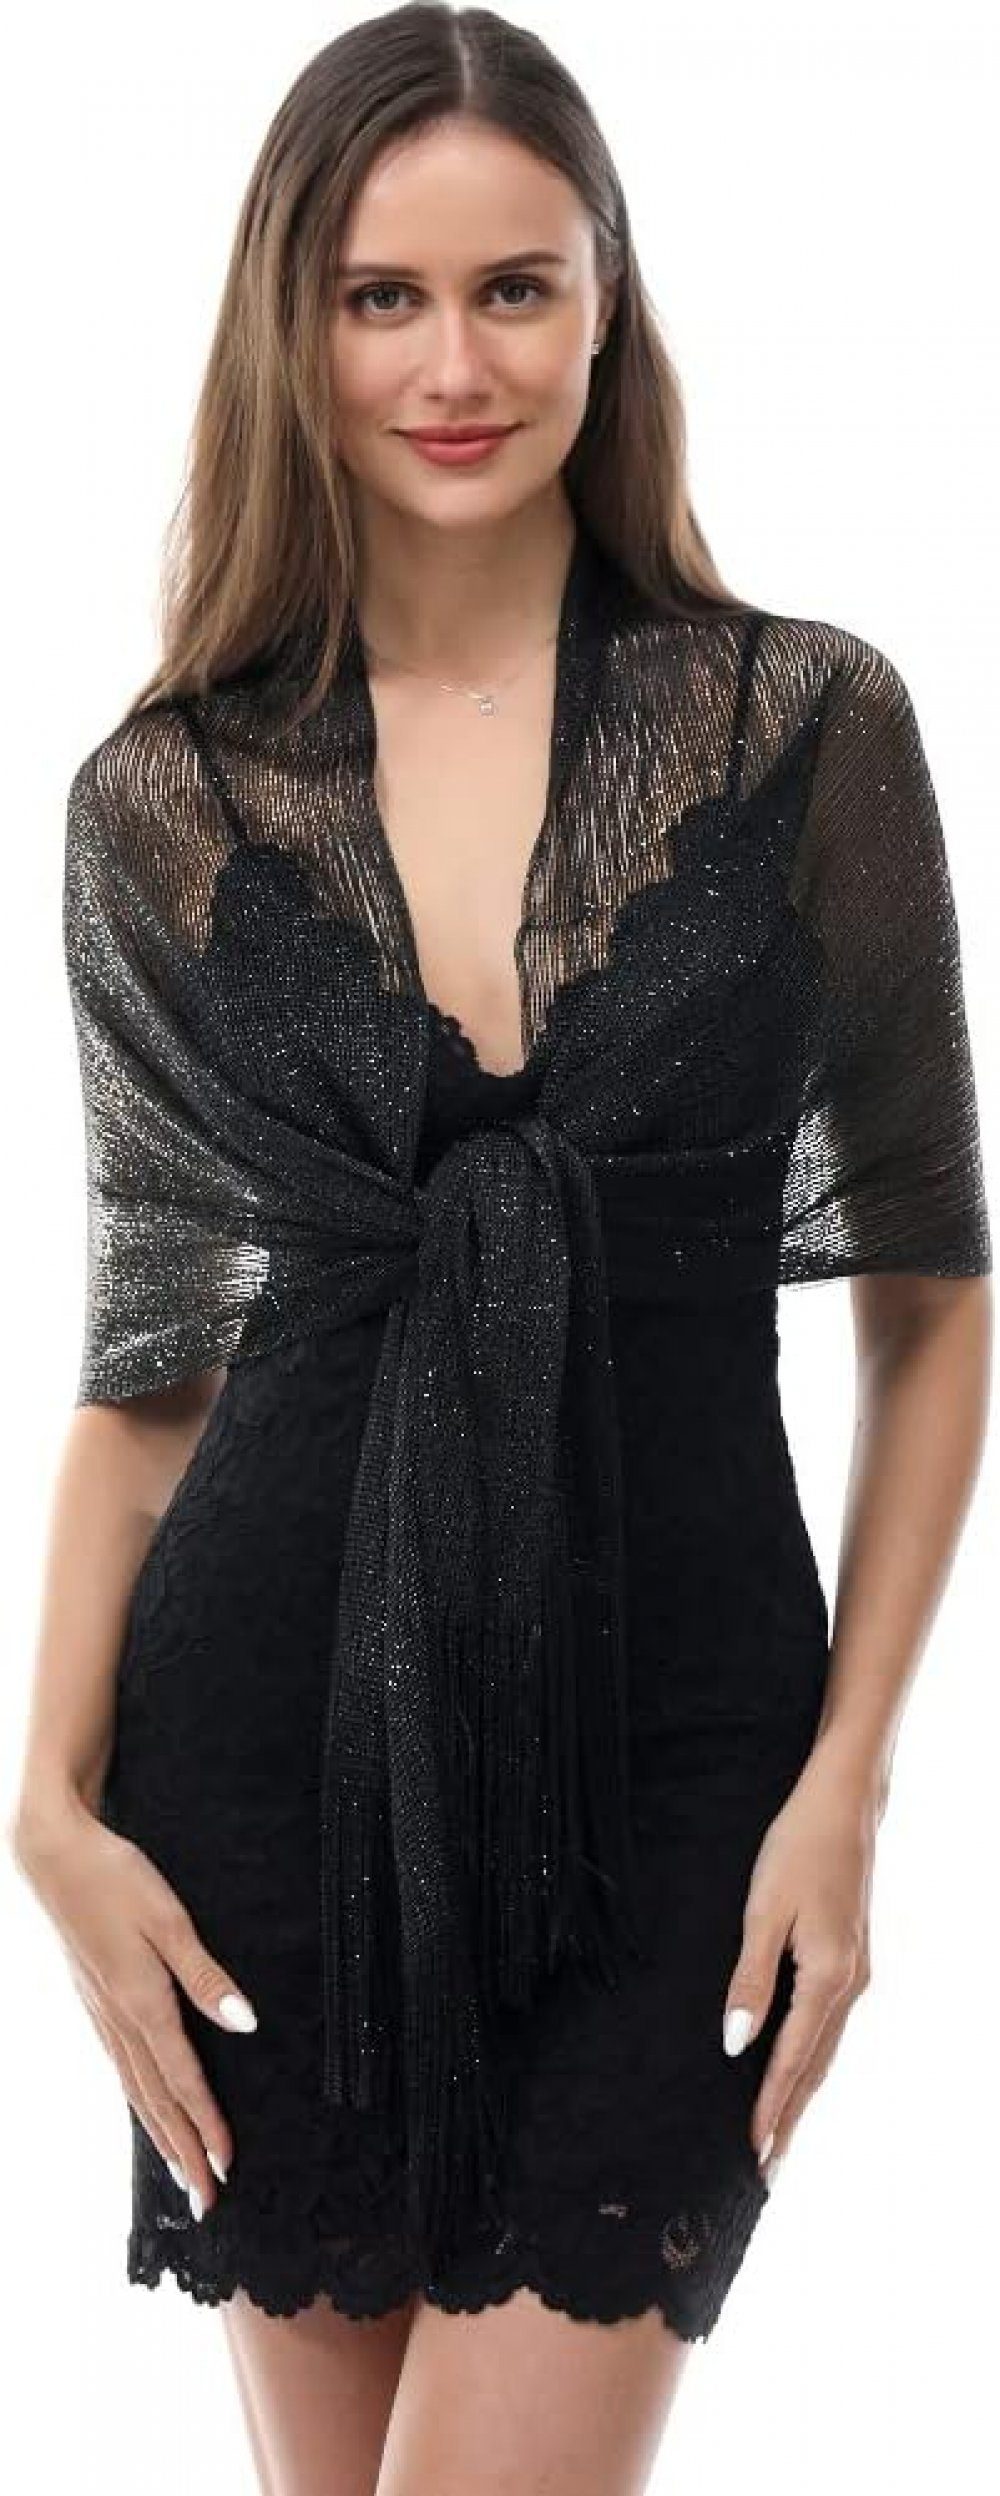 WaKuKa Schal Holiday metal buckle shawl suitable for sparkling evening parties schwarz